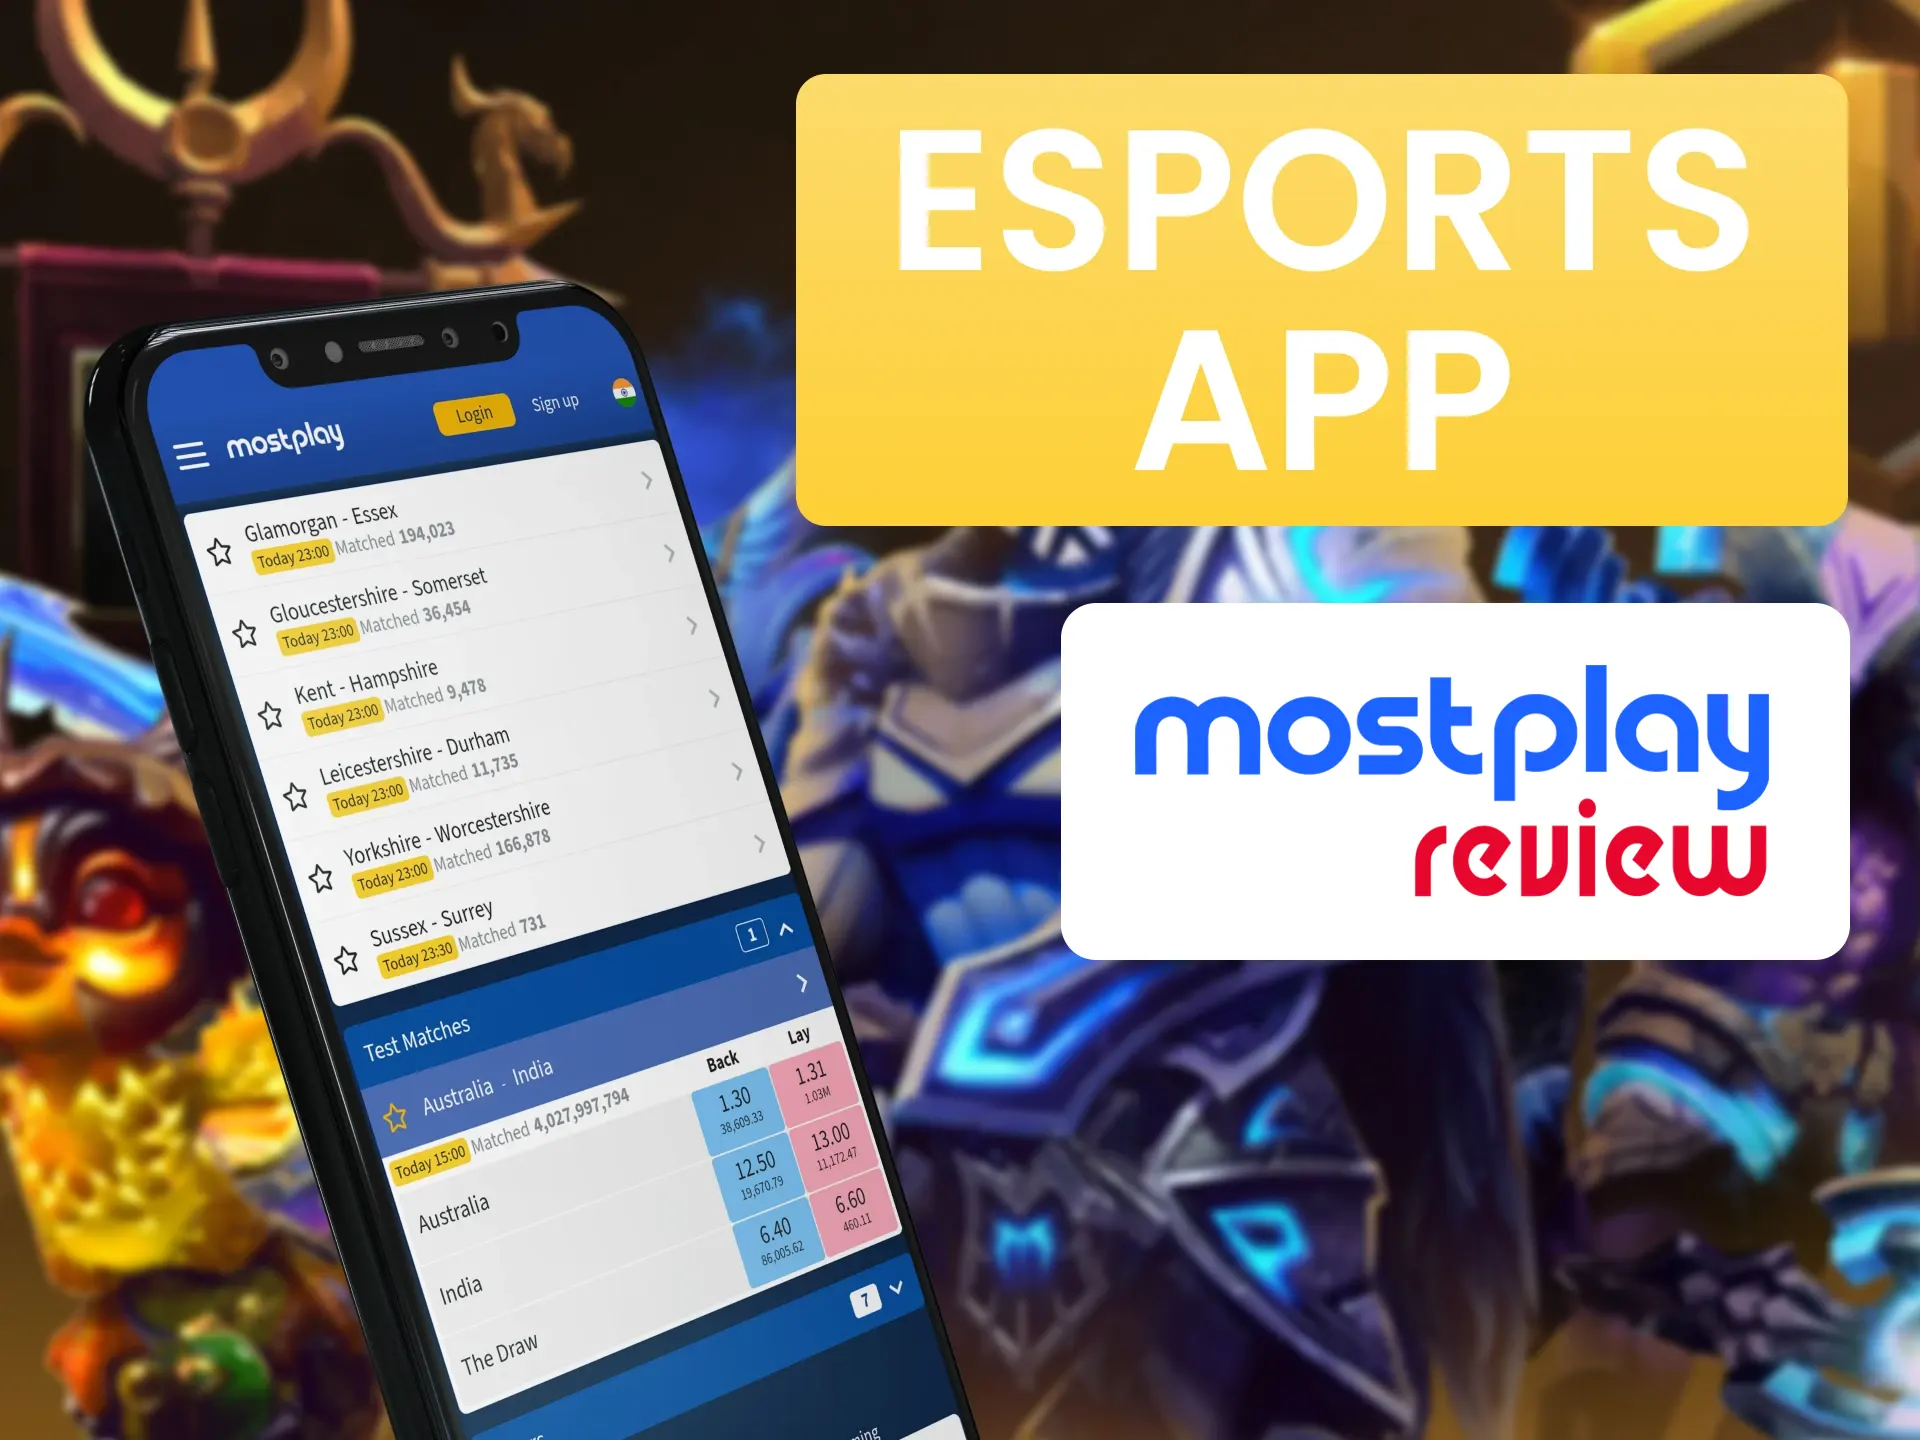 Bet on the most popular esports teams in the Mostplay esports app.